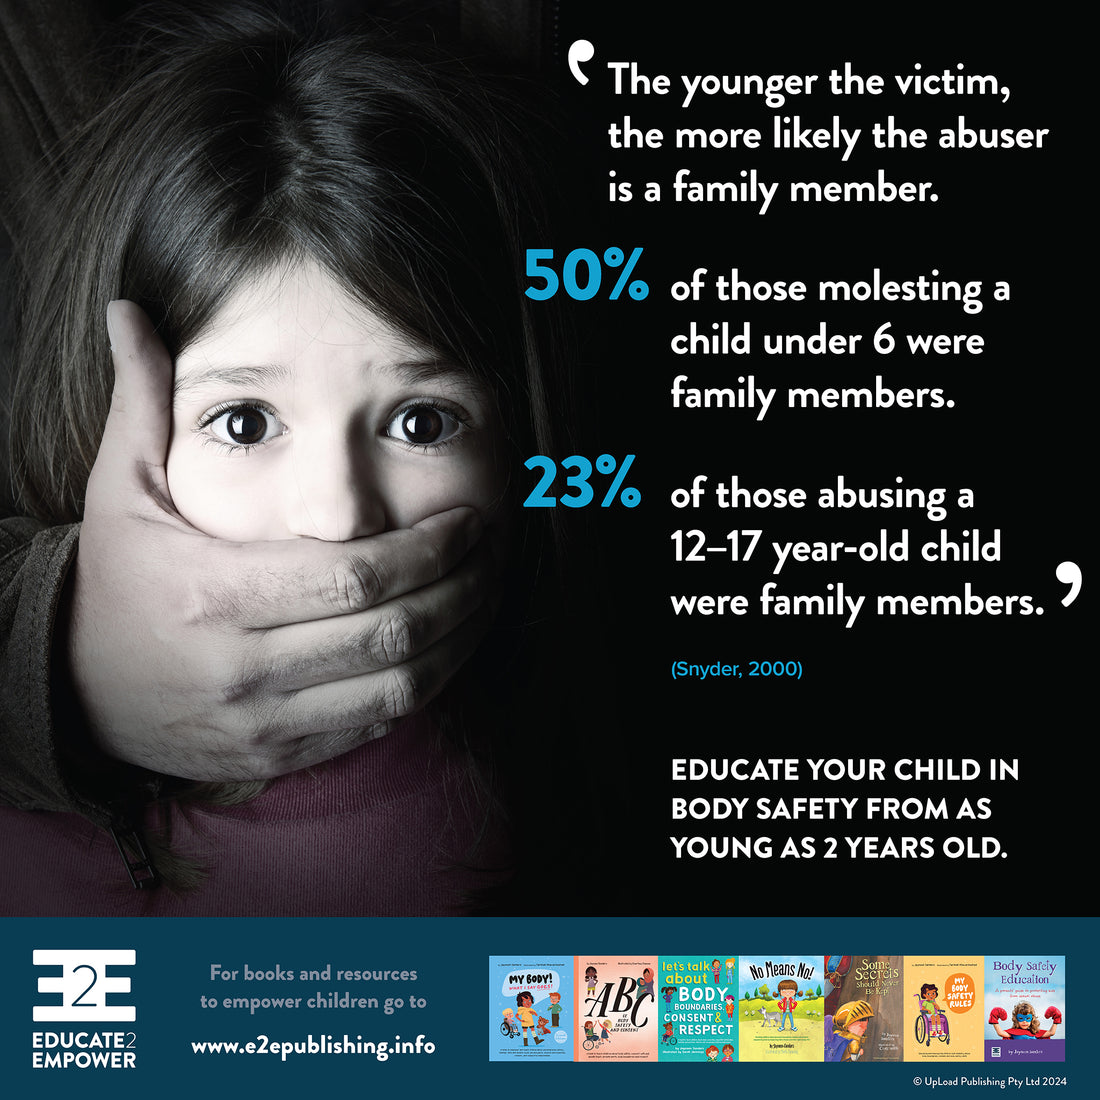 The younger the victim, the more likely the abuser is a family member.